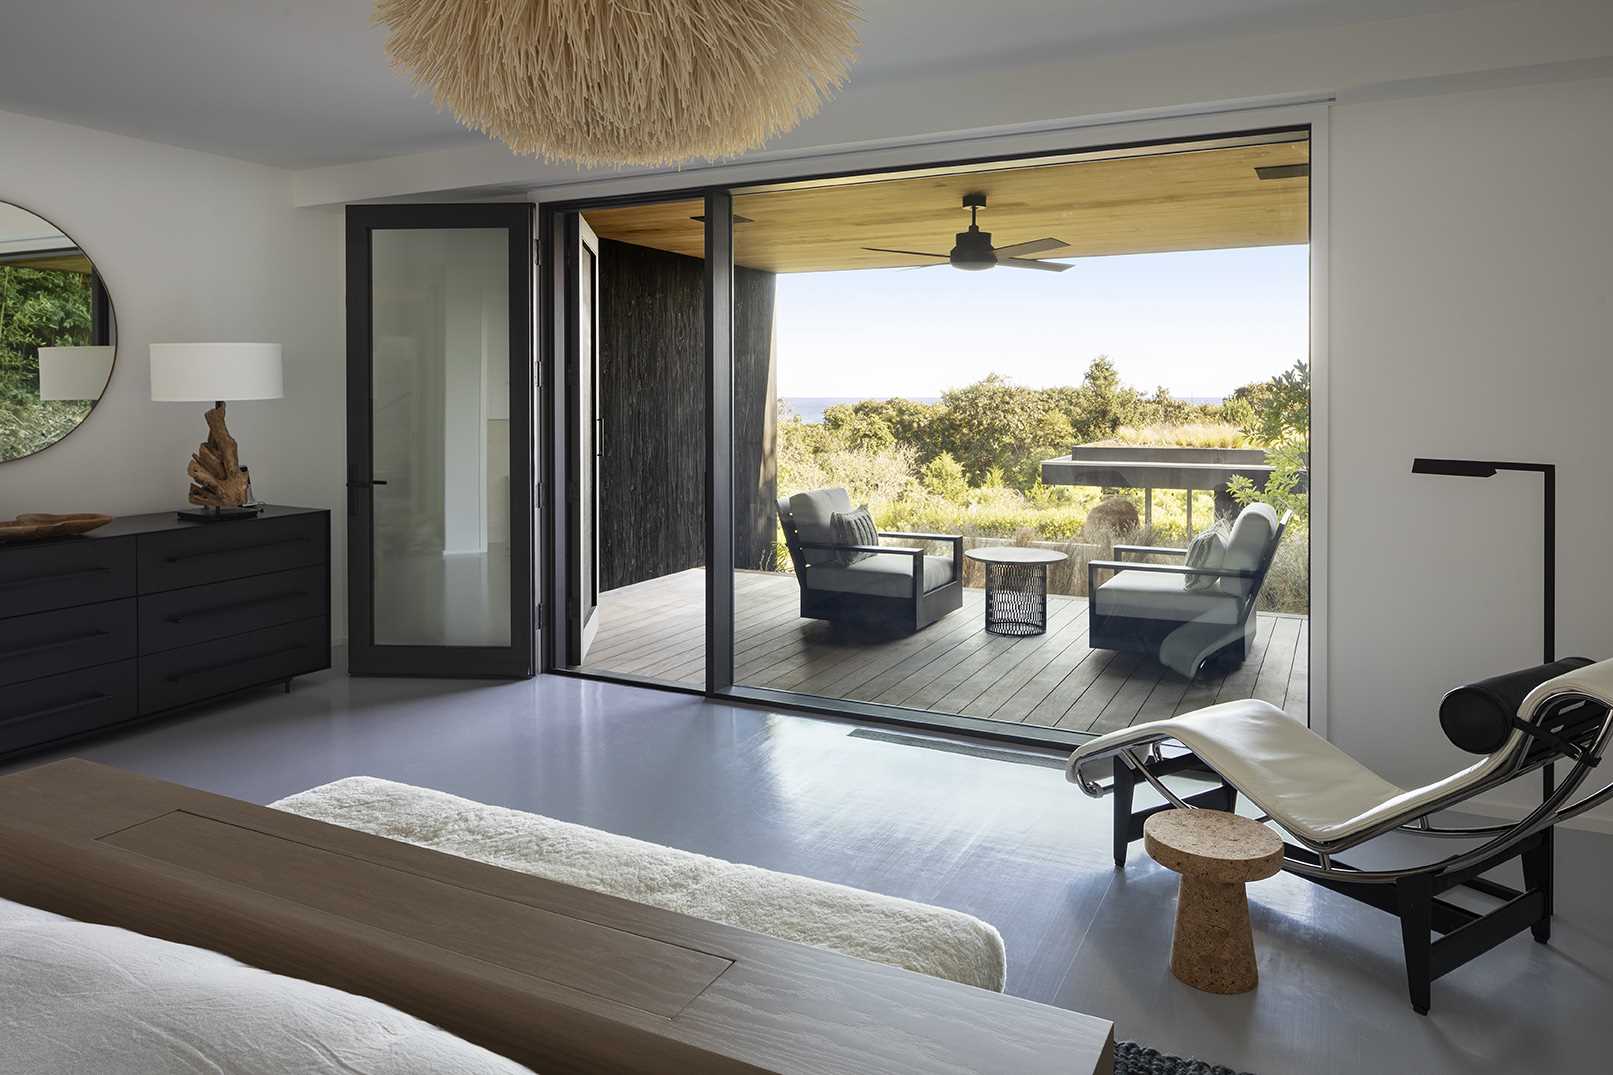 A modern bedroom with a private outdoor space that has views of the garden and water in the distance.